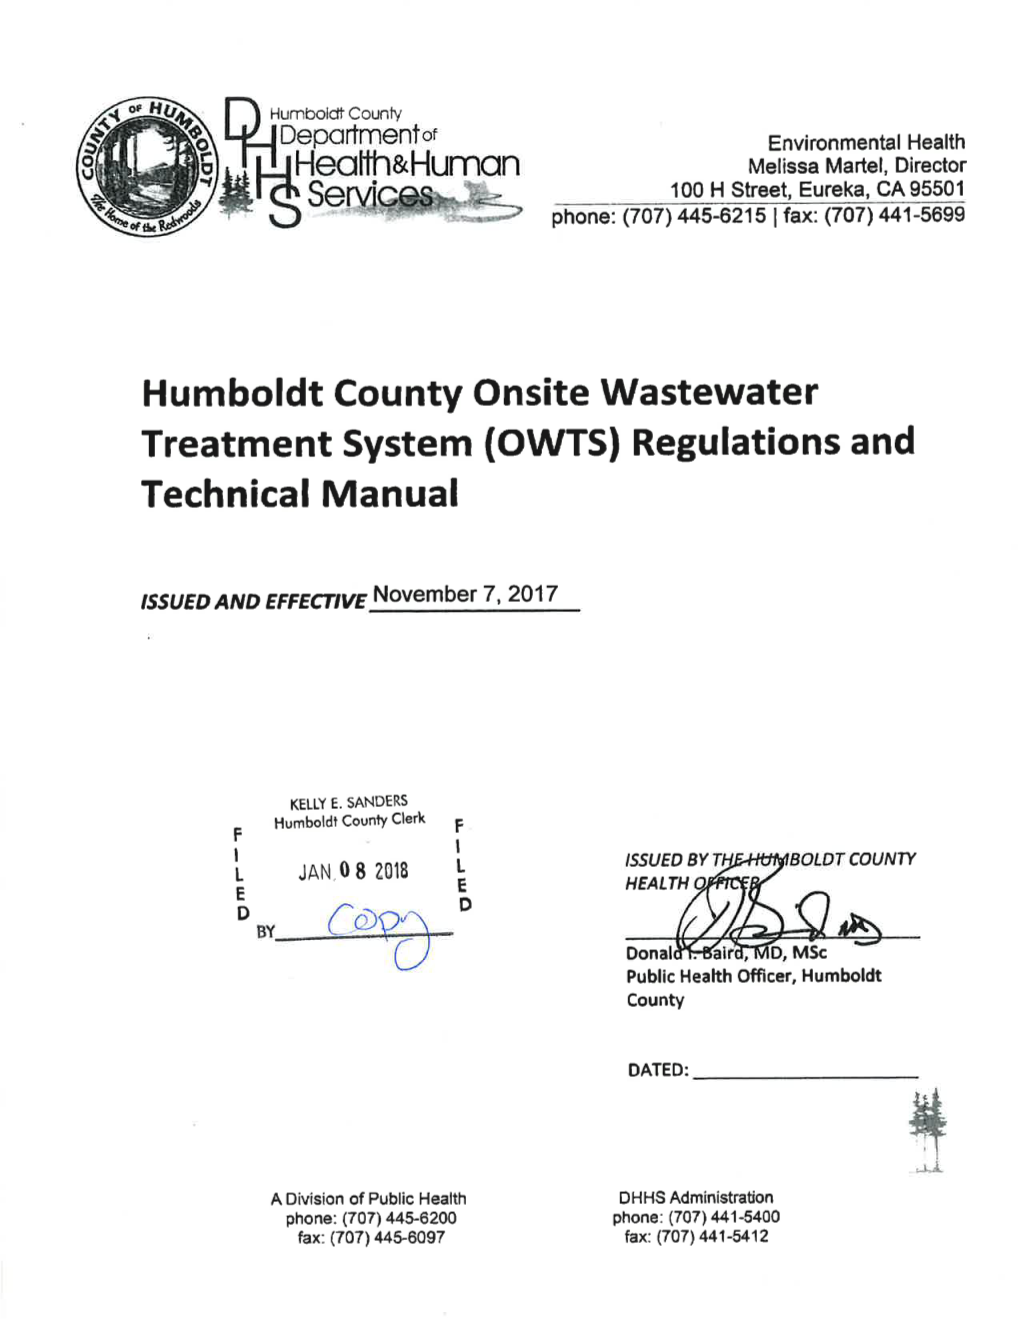 Onsite Wastewater Treatment System (OWTS) Management in Humboldt County